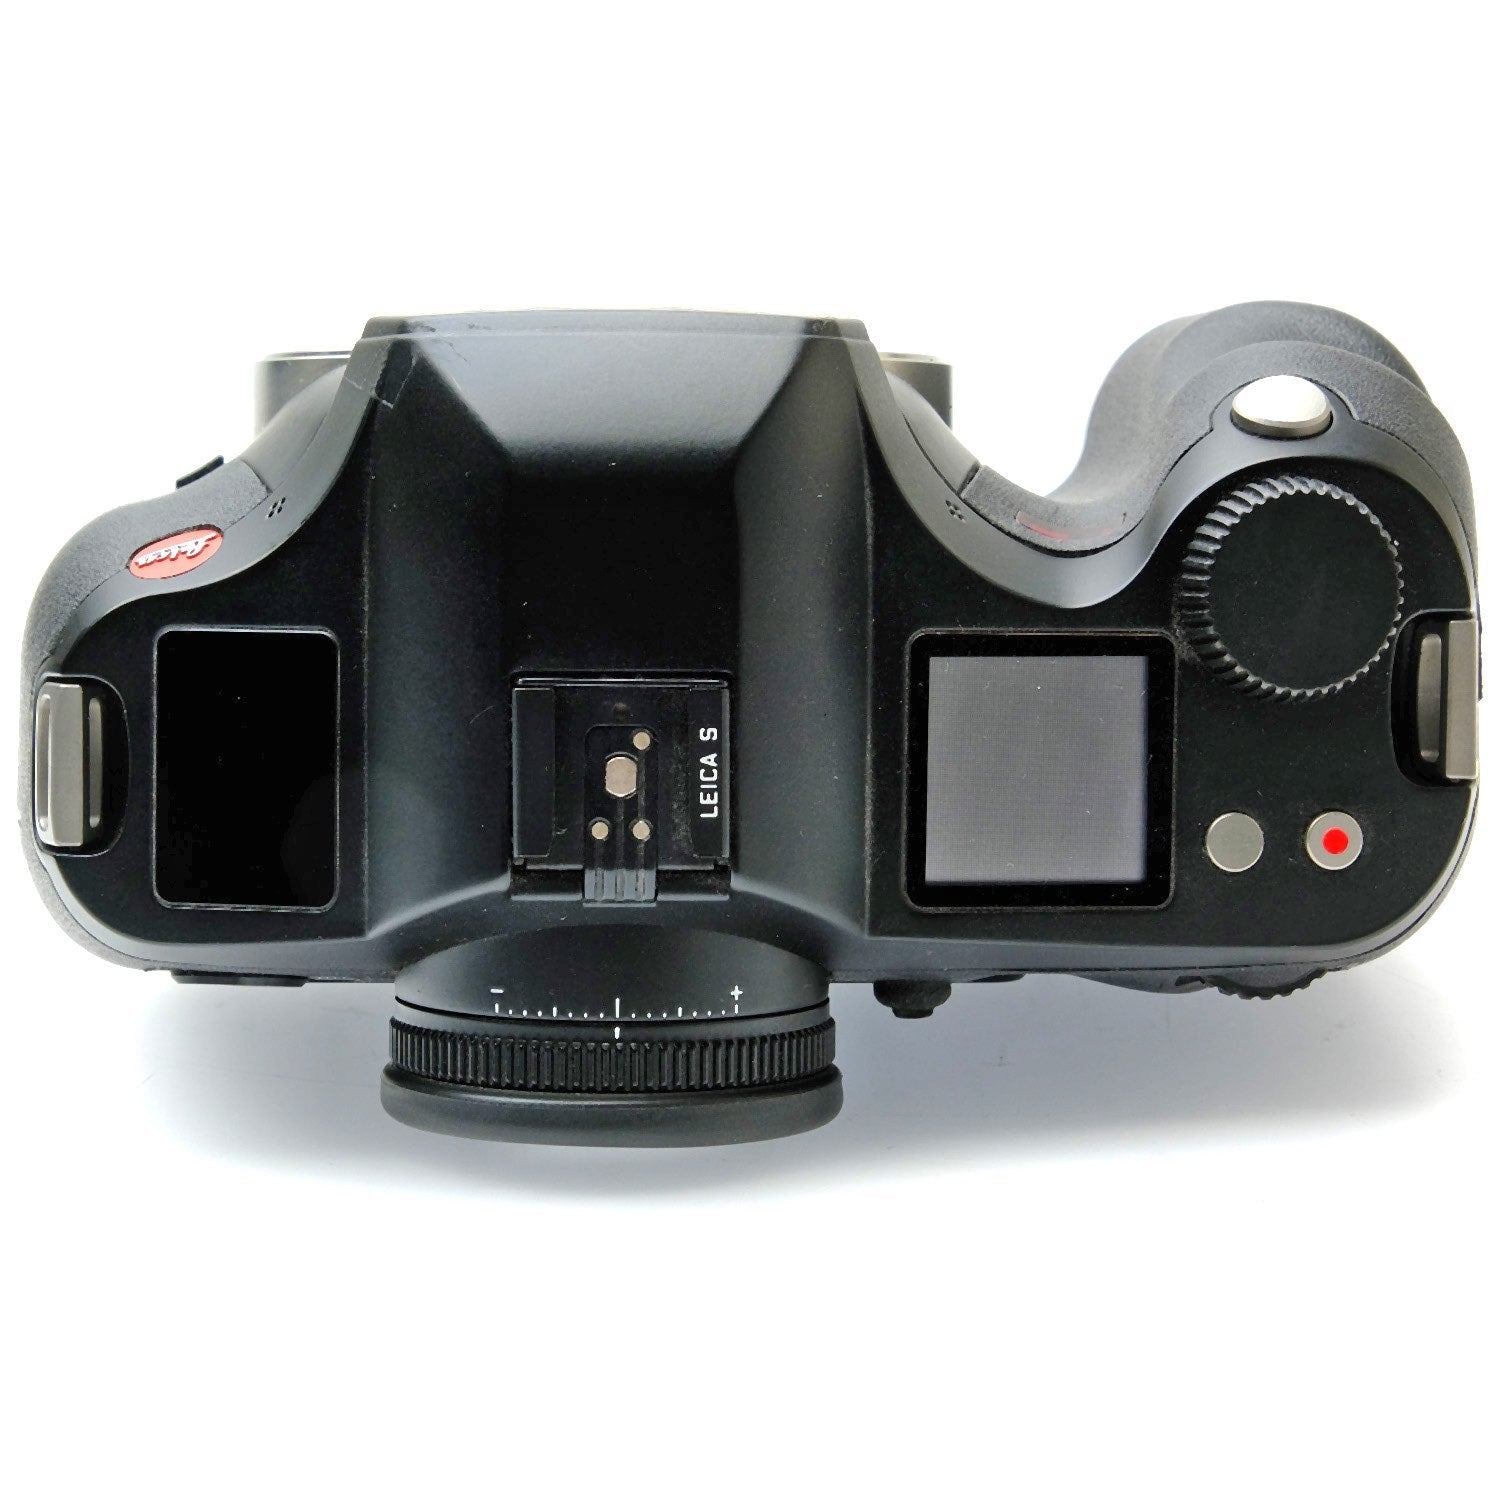 Leica S3, Boxed 5251349